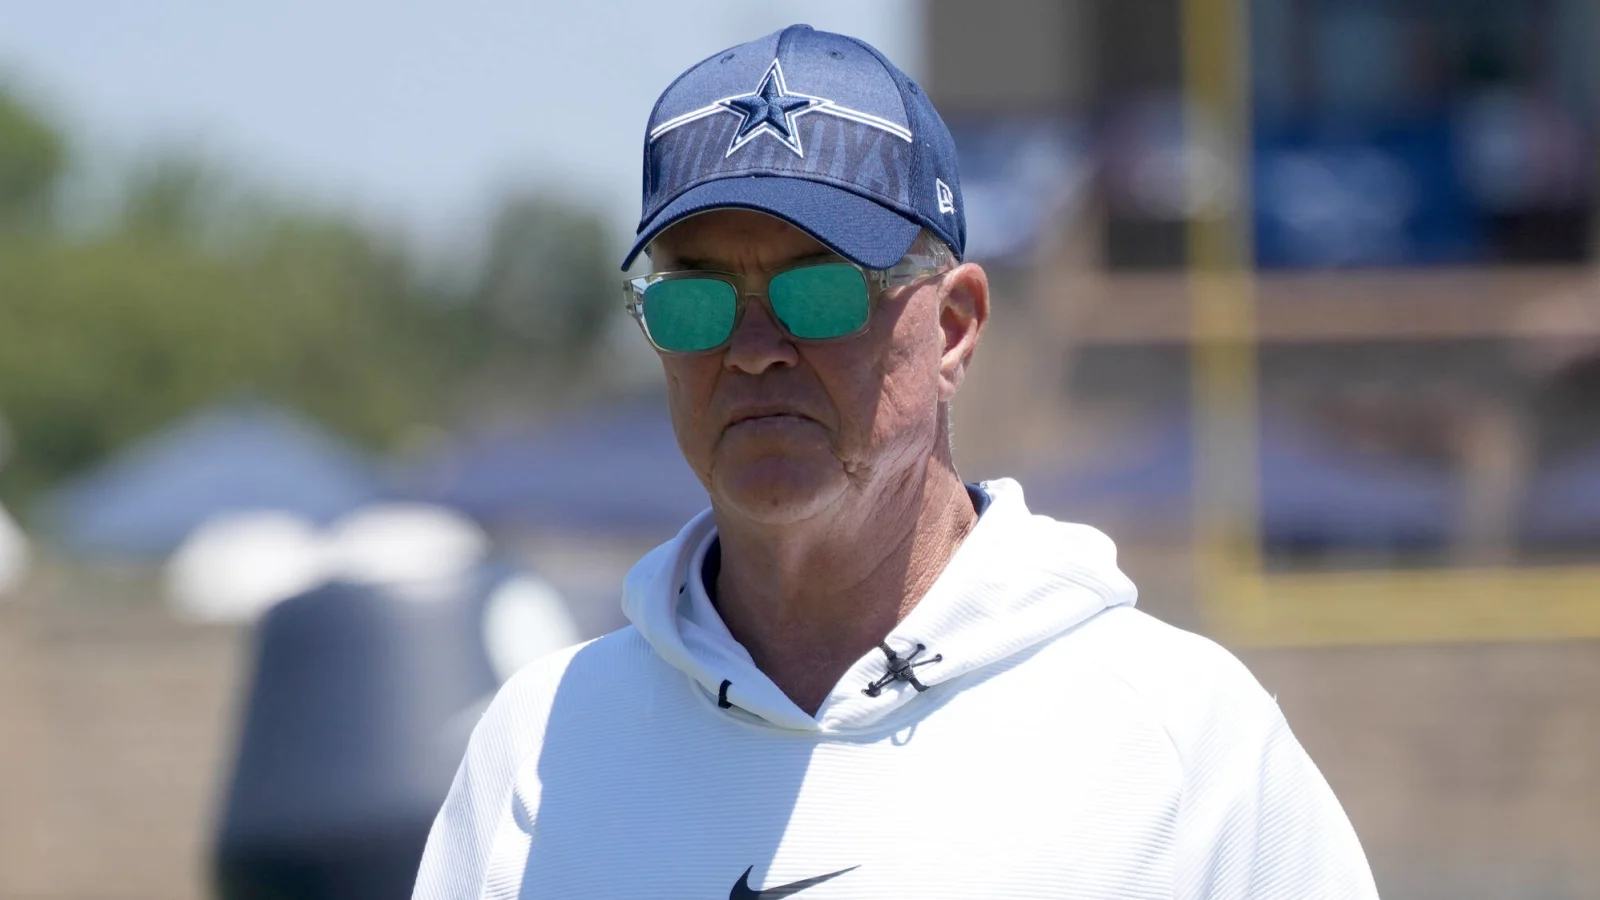 Why Cowboys Fans Are Upset: Inside Look at the Team's Quiet Offseason and Big Promises